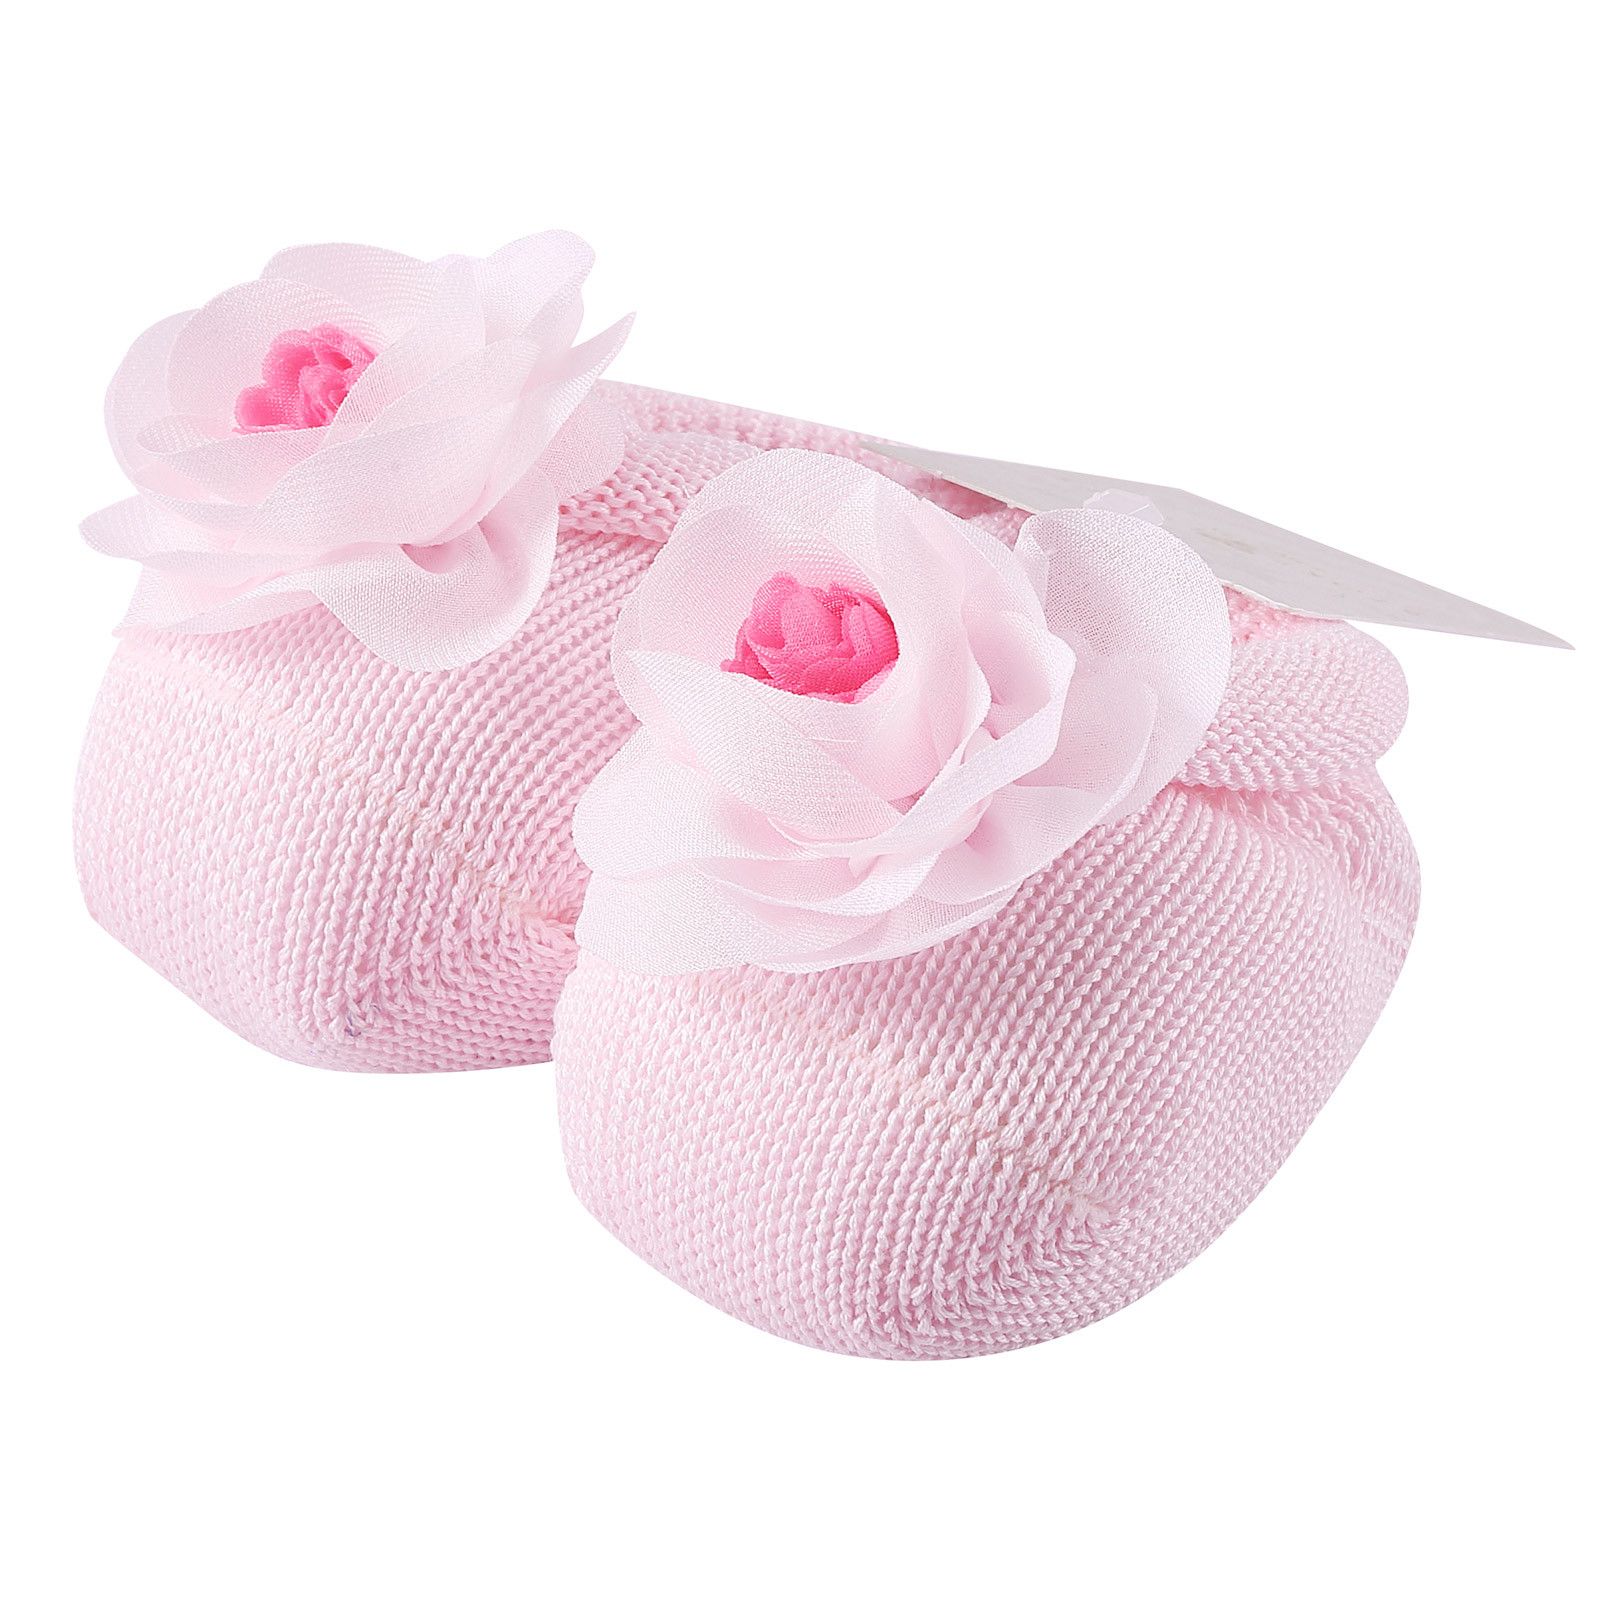 Baby Pink Knitted Cotton Rose Shoes&Hair Band Gift Set - CÉMAROSE | Children's Fashion Store - 2